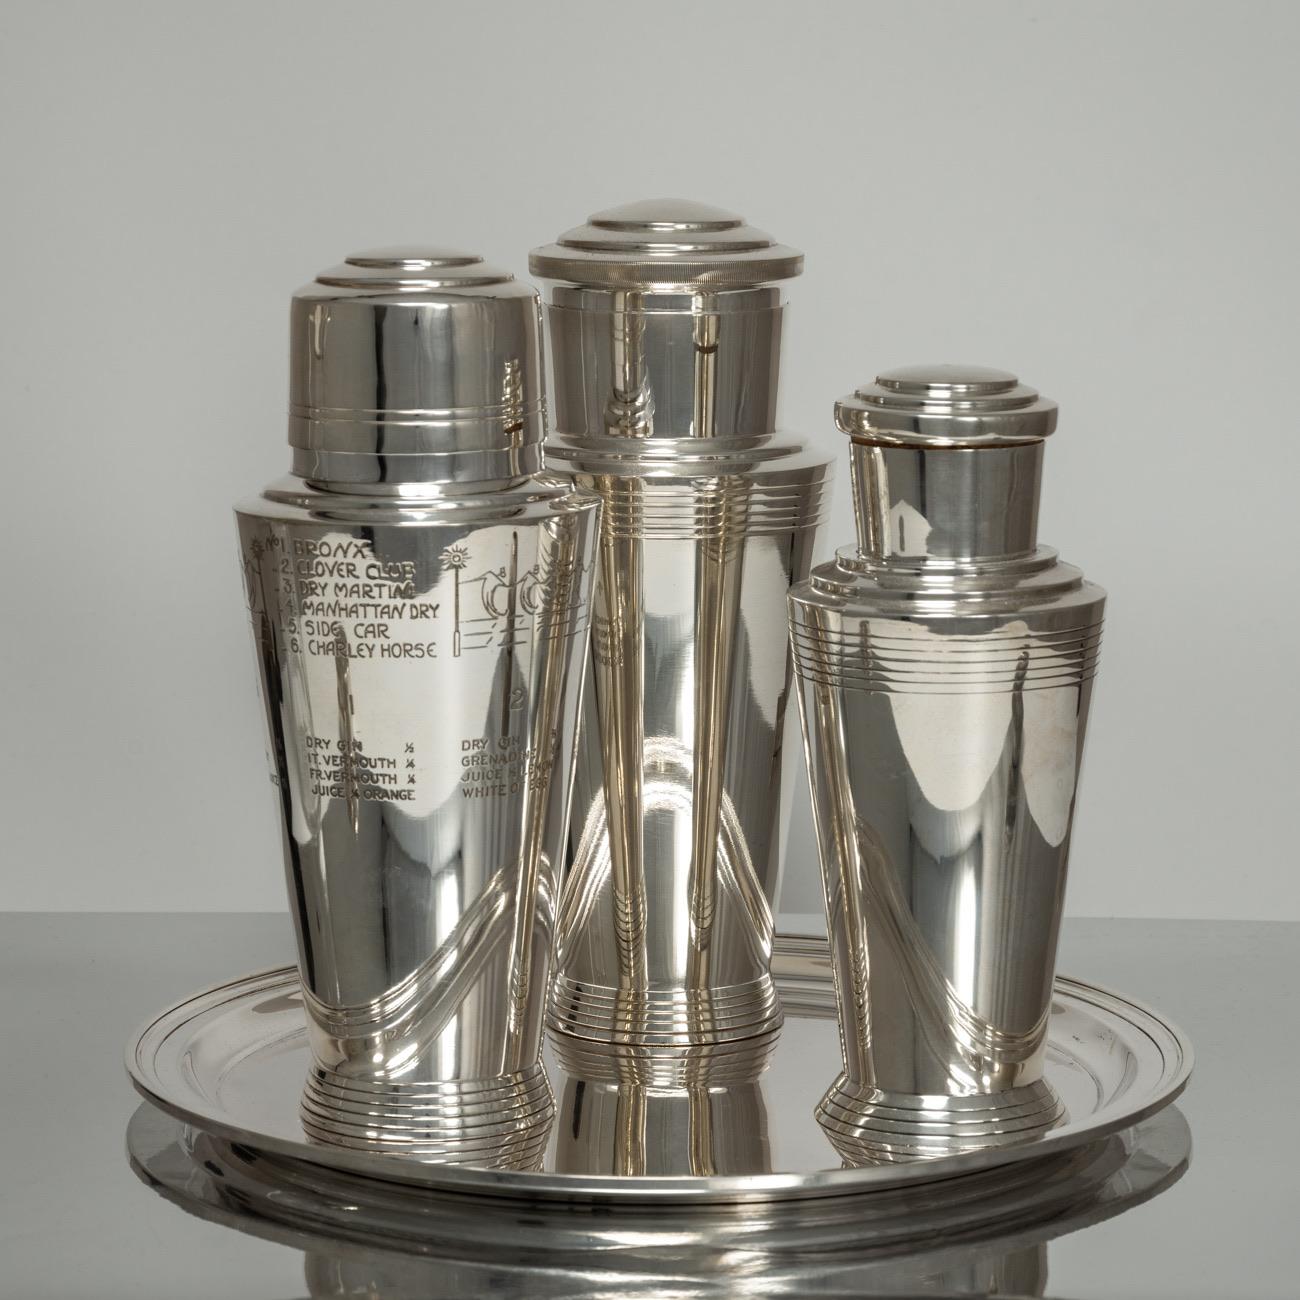 Mid-20th Century Sterling Silver Cocktail Shaker Designed by Keith Murray, Hallmarked, 1932